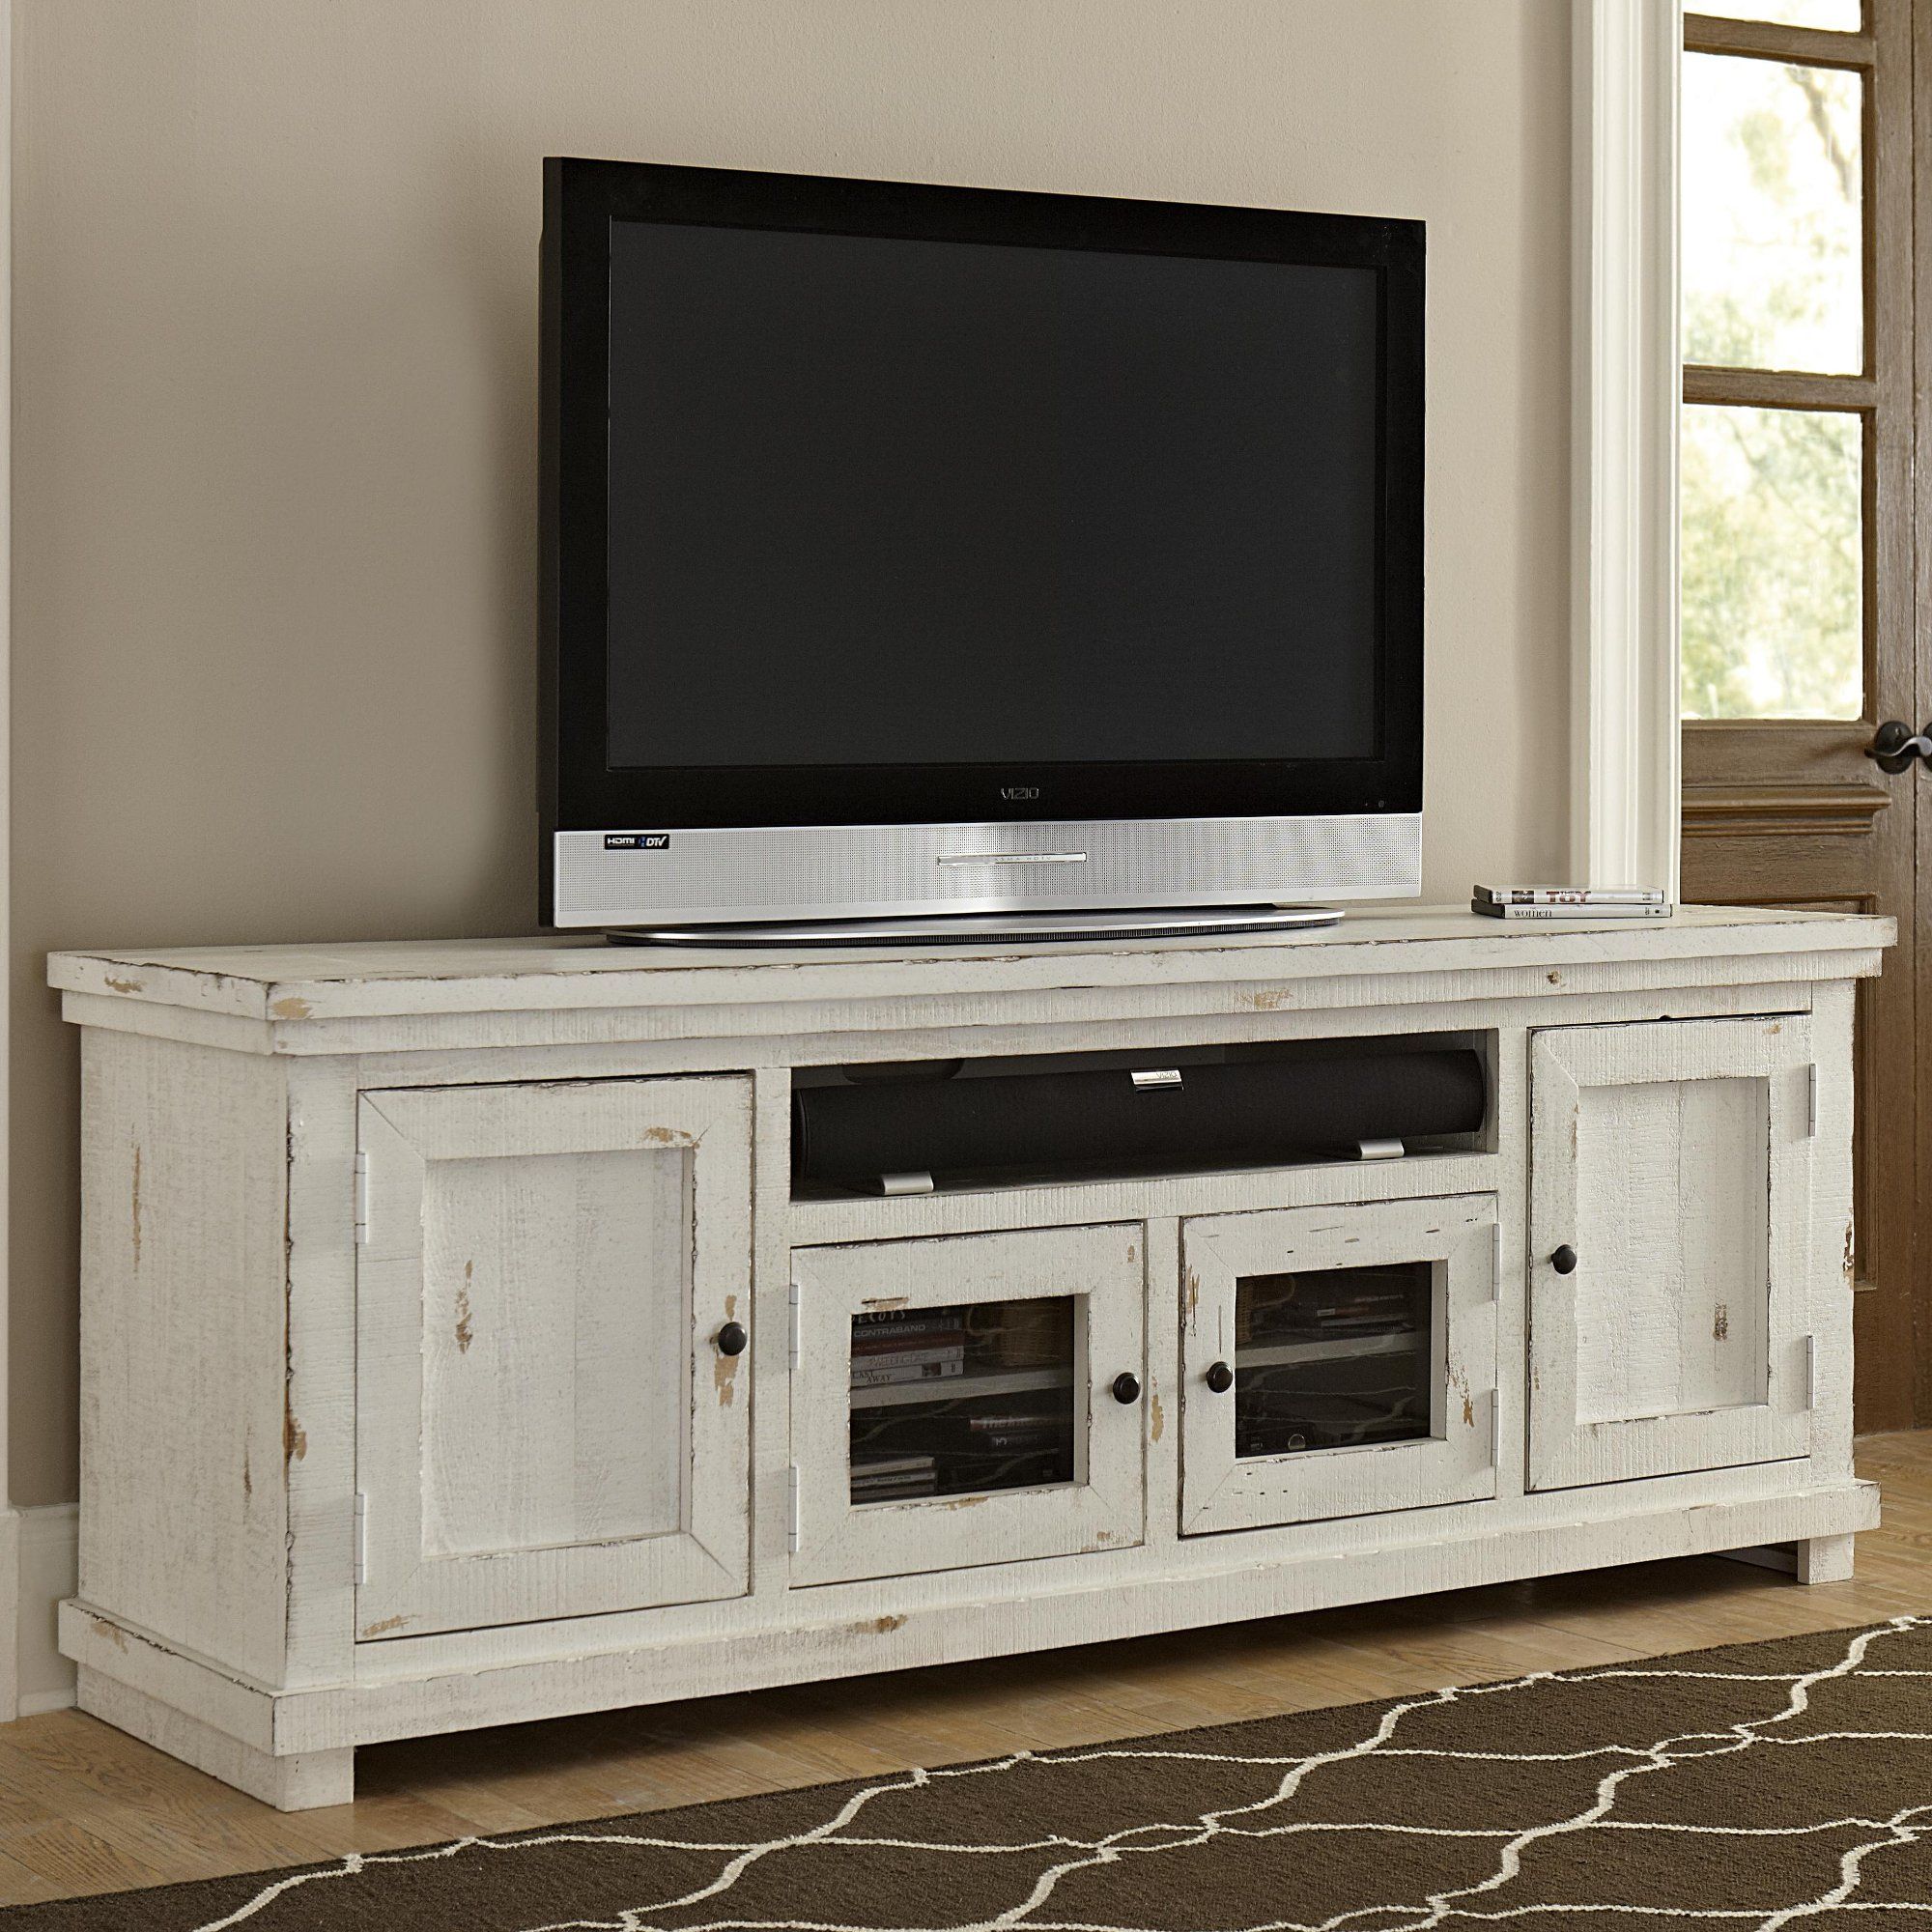 Distressed White 3 Piece Rustic Entertainment Center With Tv Stands With Table Storage Cabinet In Rustic Gray Wash (View 12 of 15)